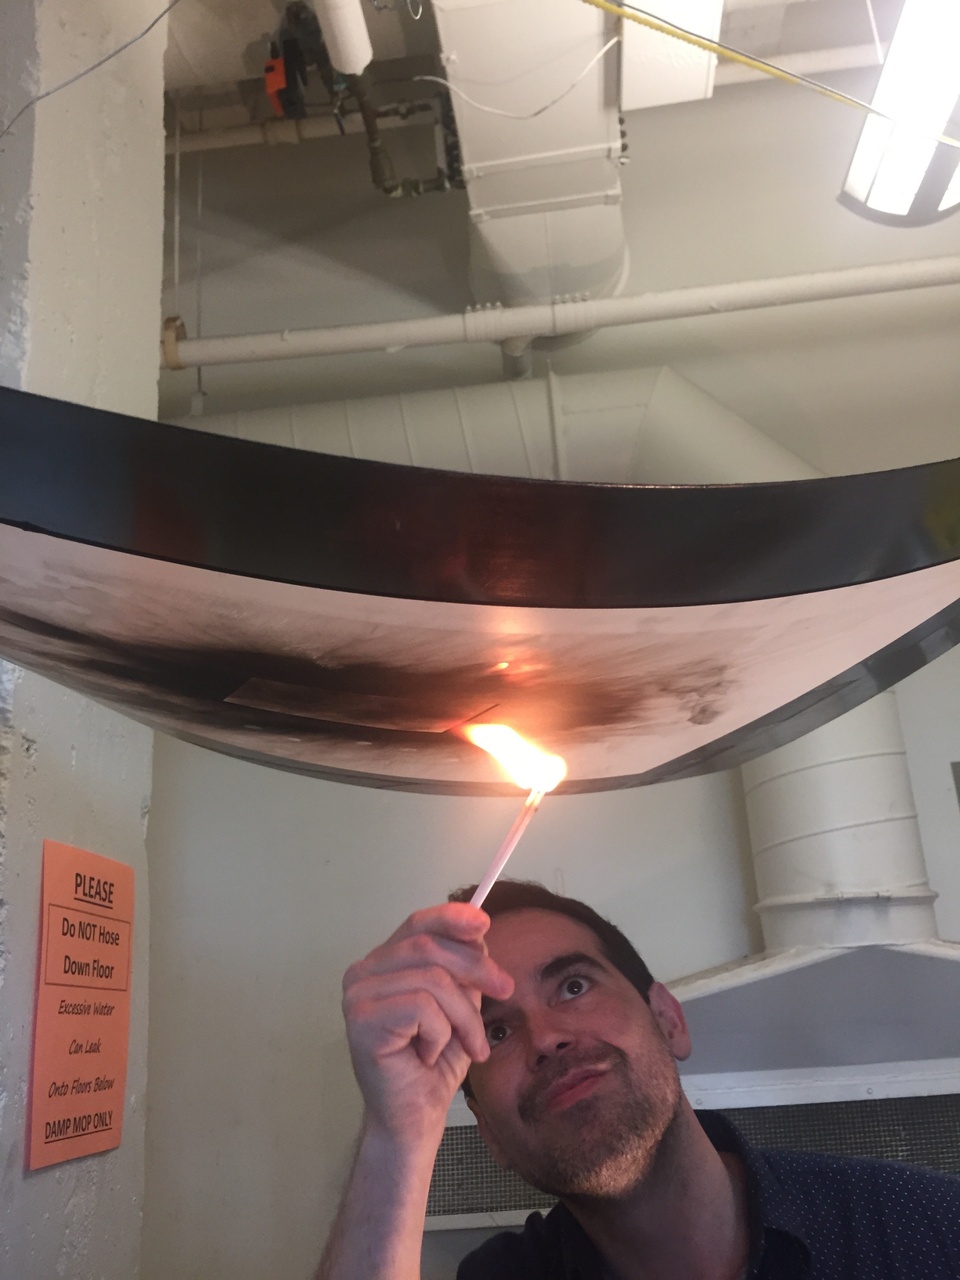 Artist Dario Robleto applying flame to the paper